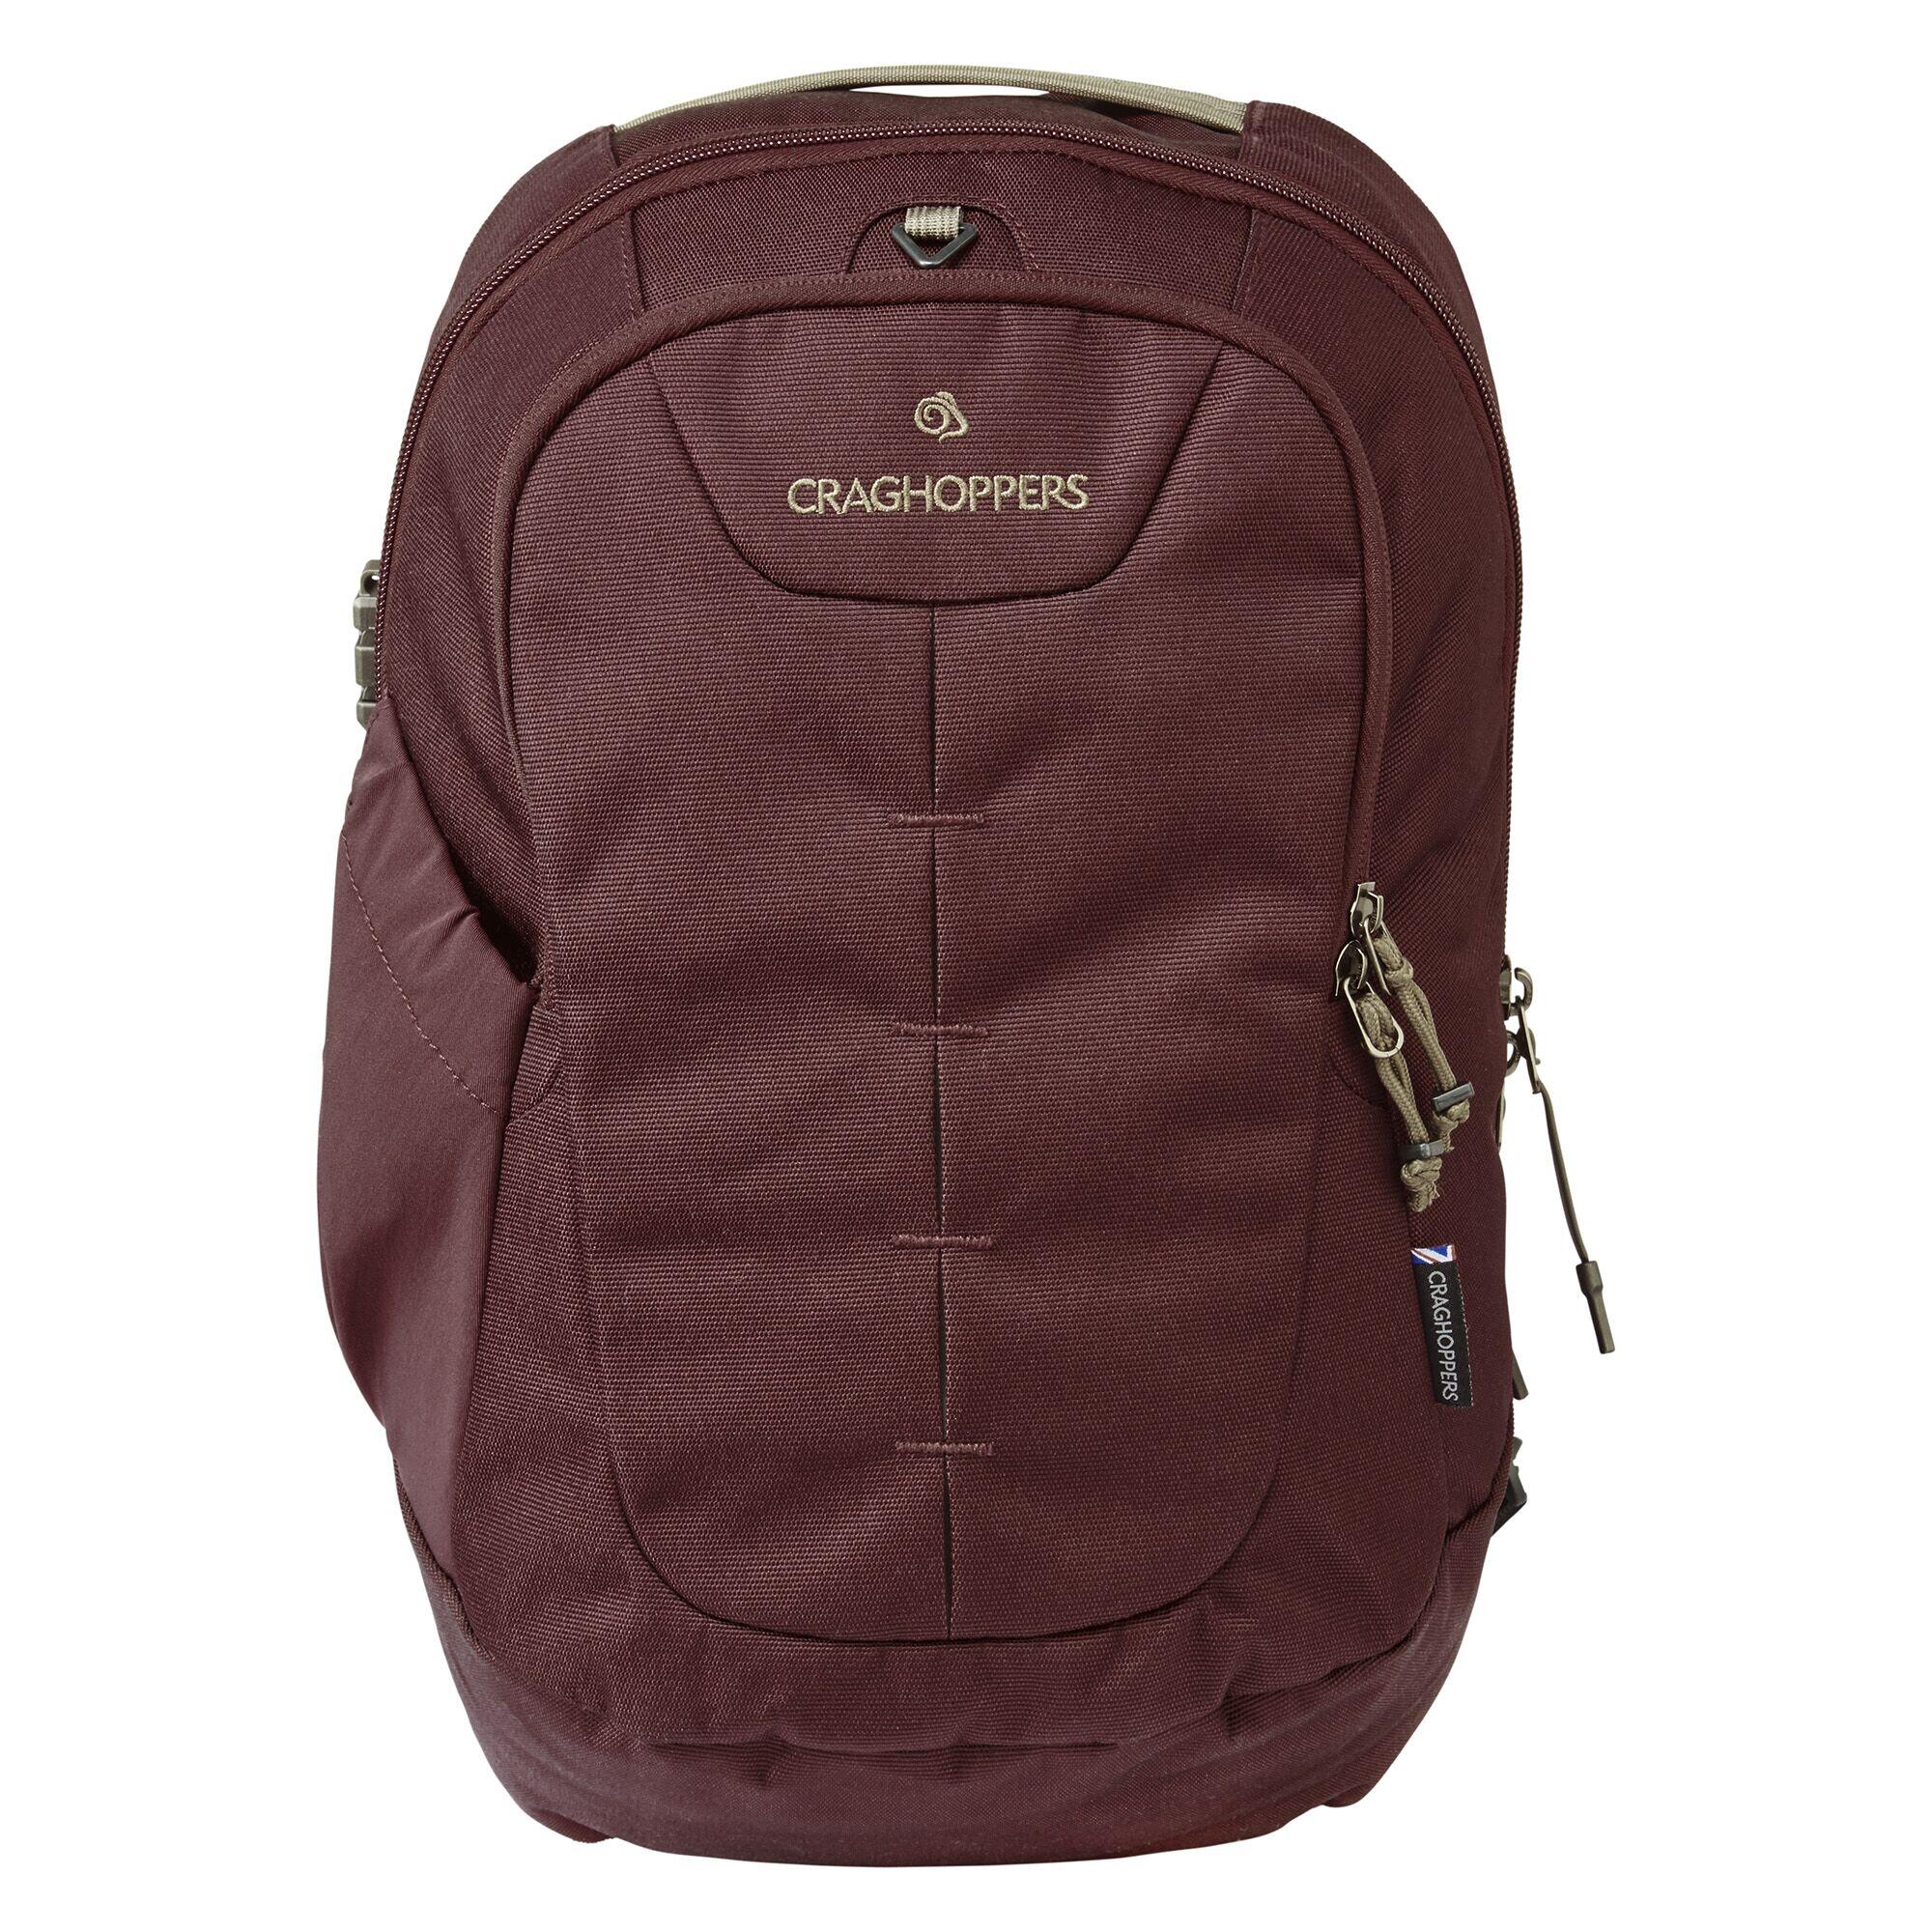 18L Anti-Theft Backpack 1/3